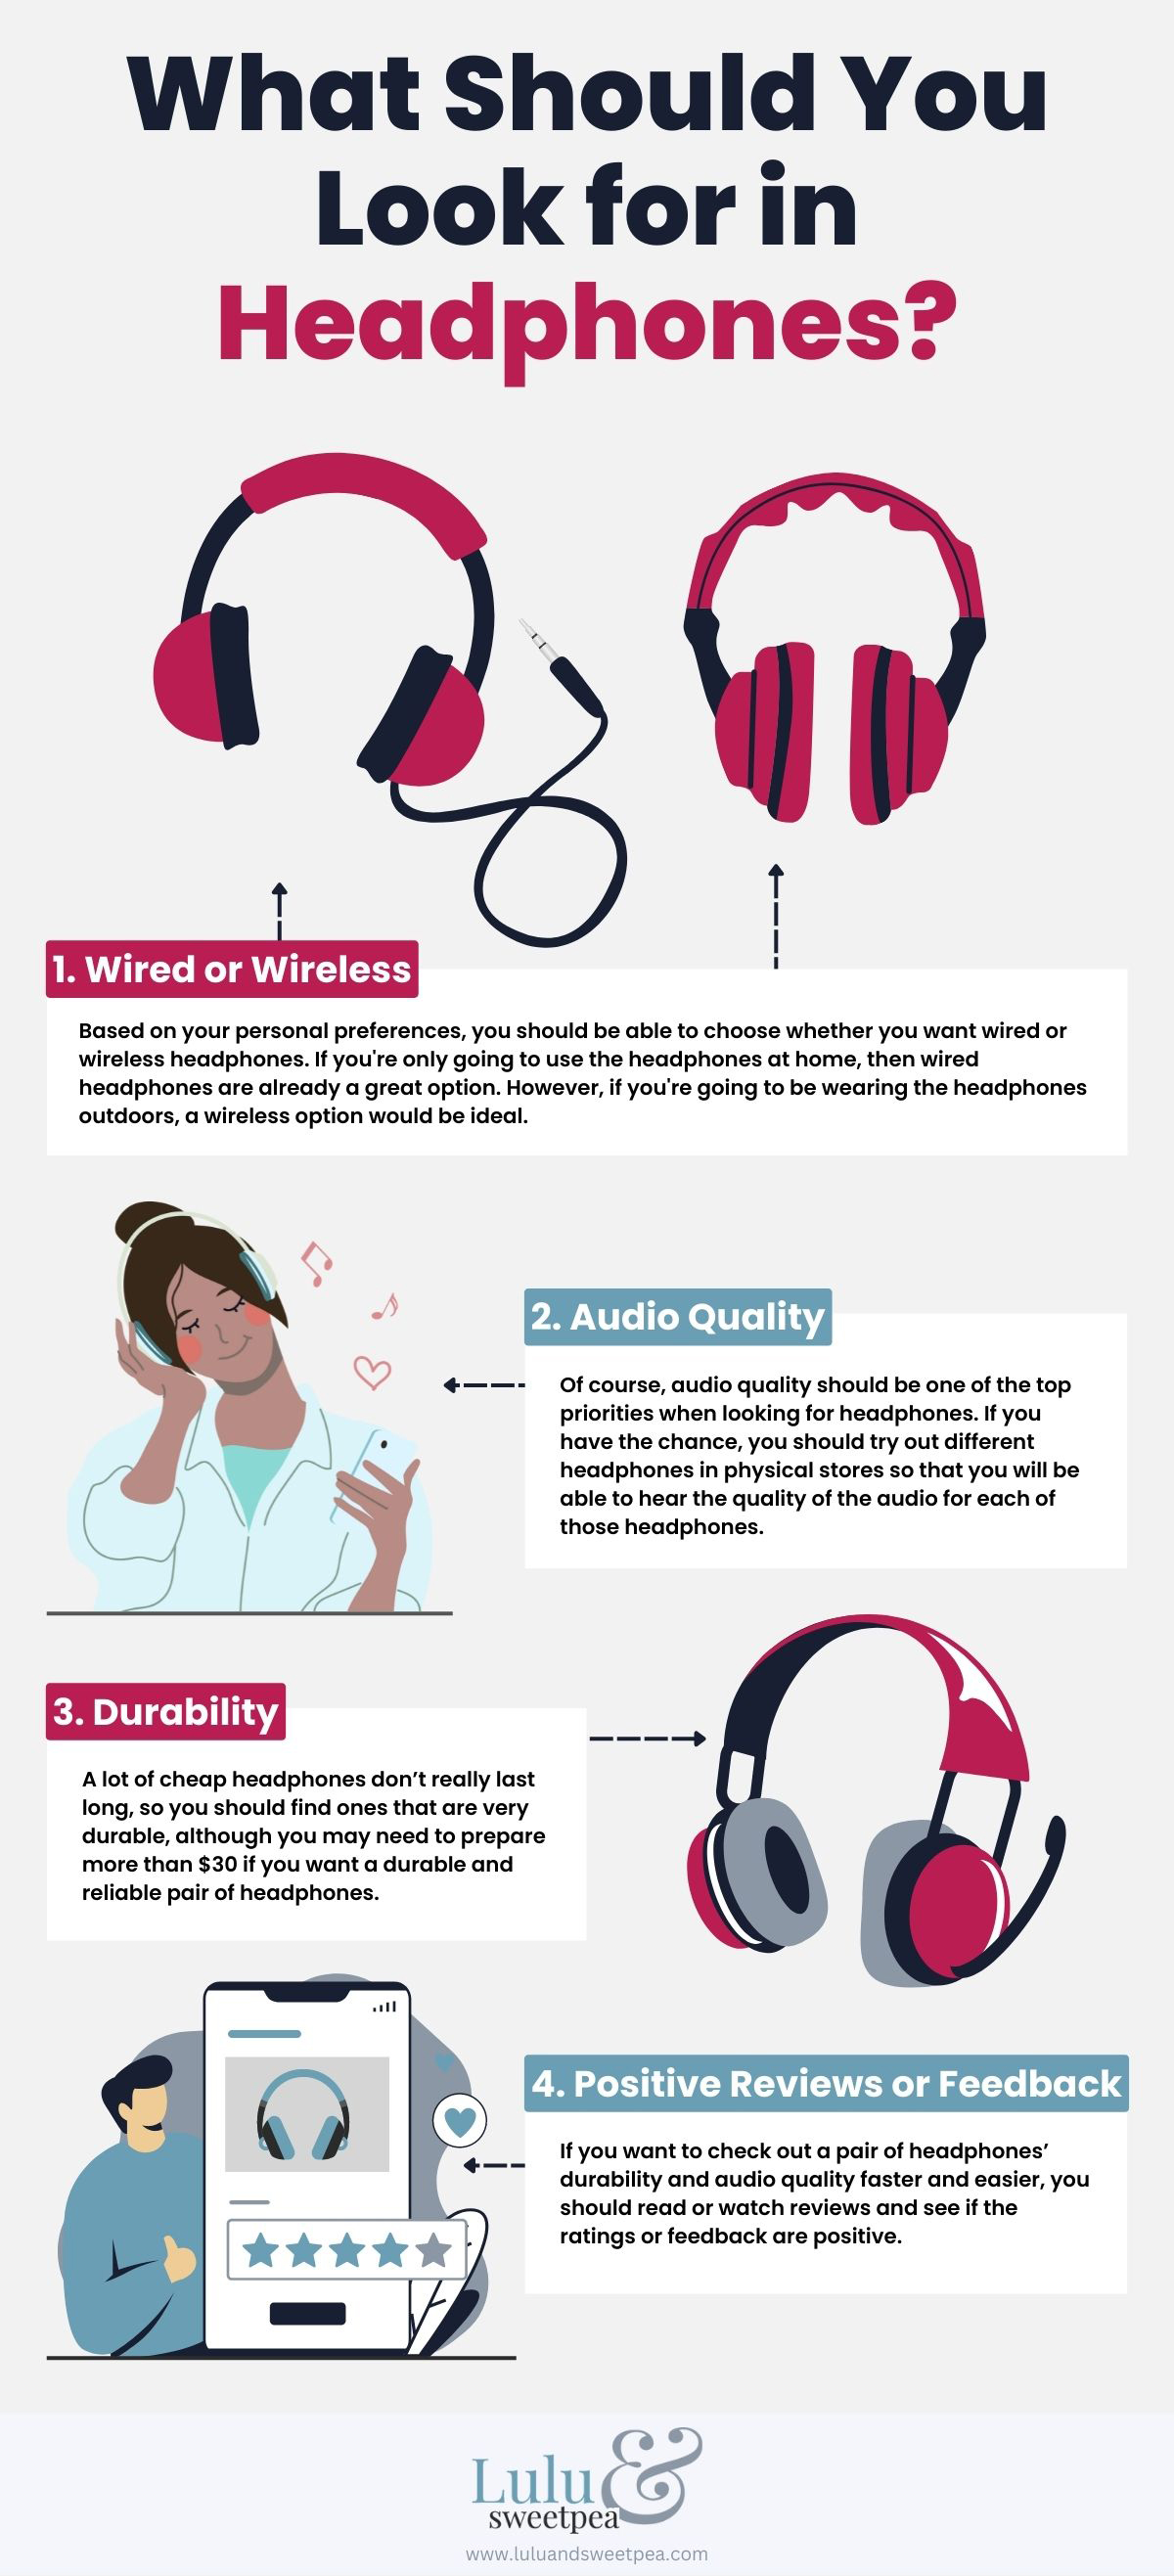 Things to Consider Before Buying Headphones